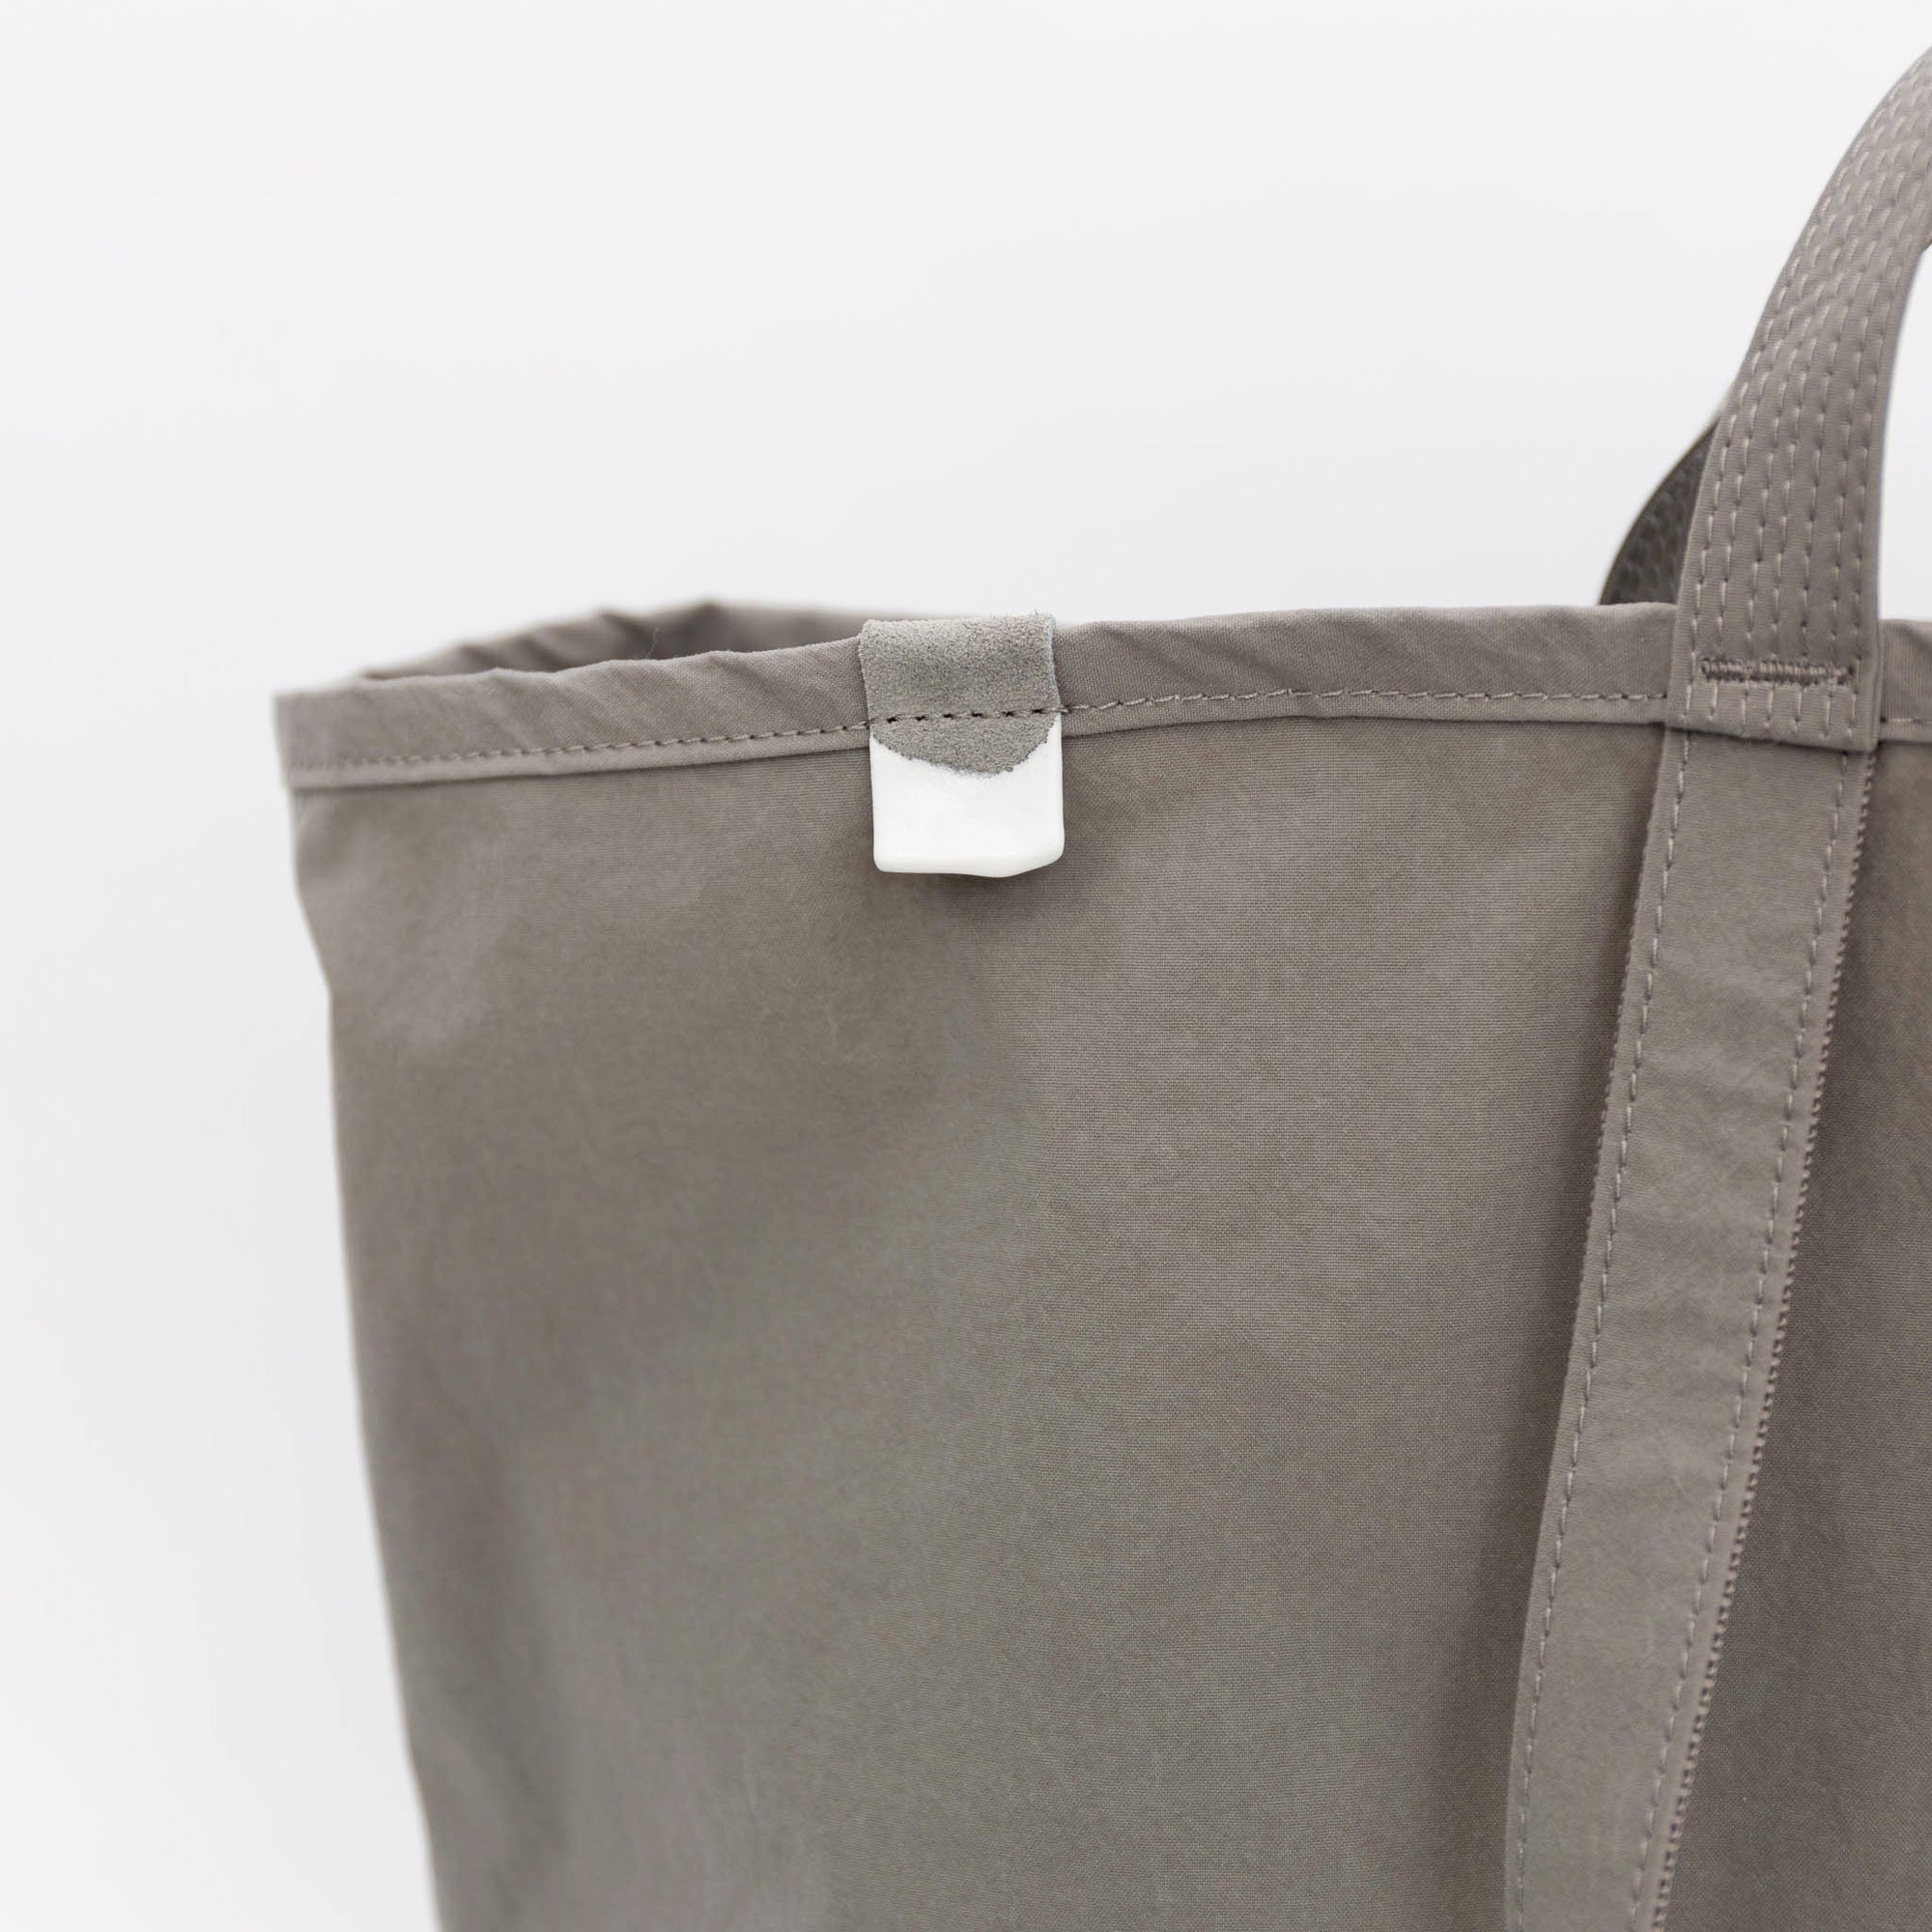 ANUNFOLD Travel Tote - Gray | Tortoise General Store